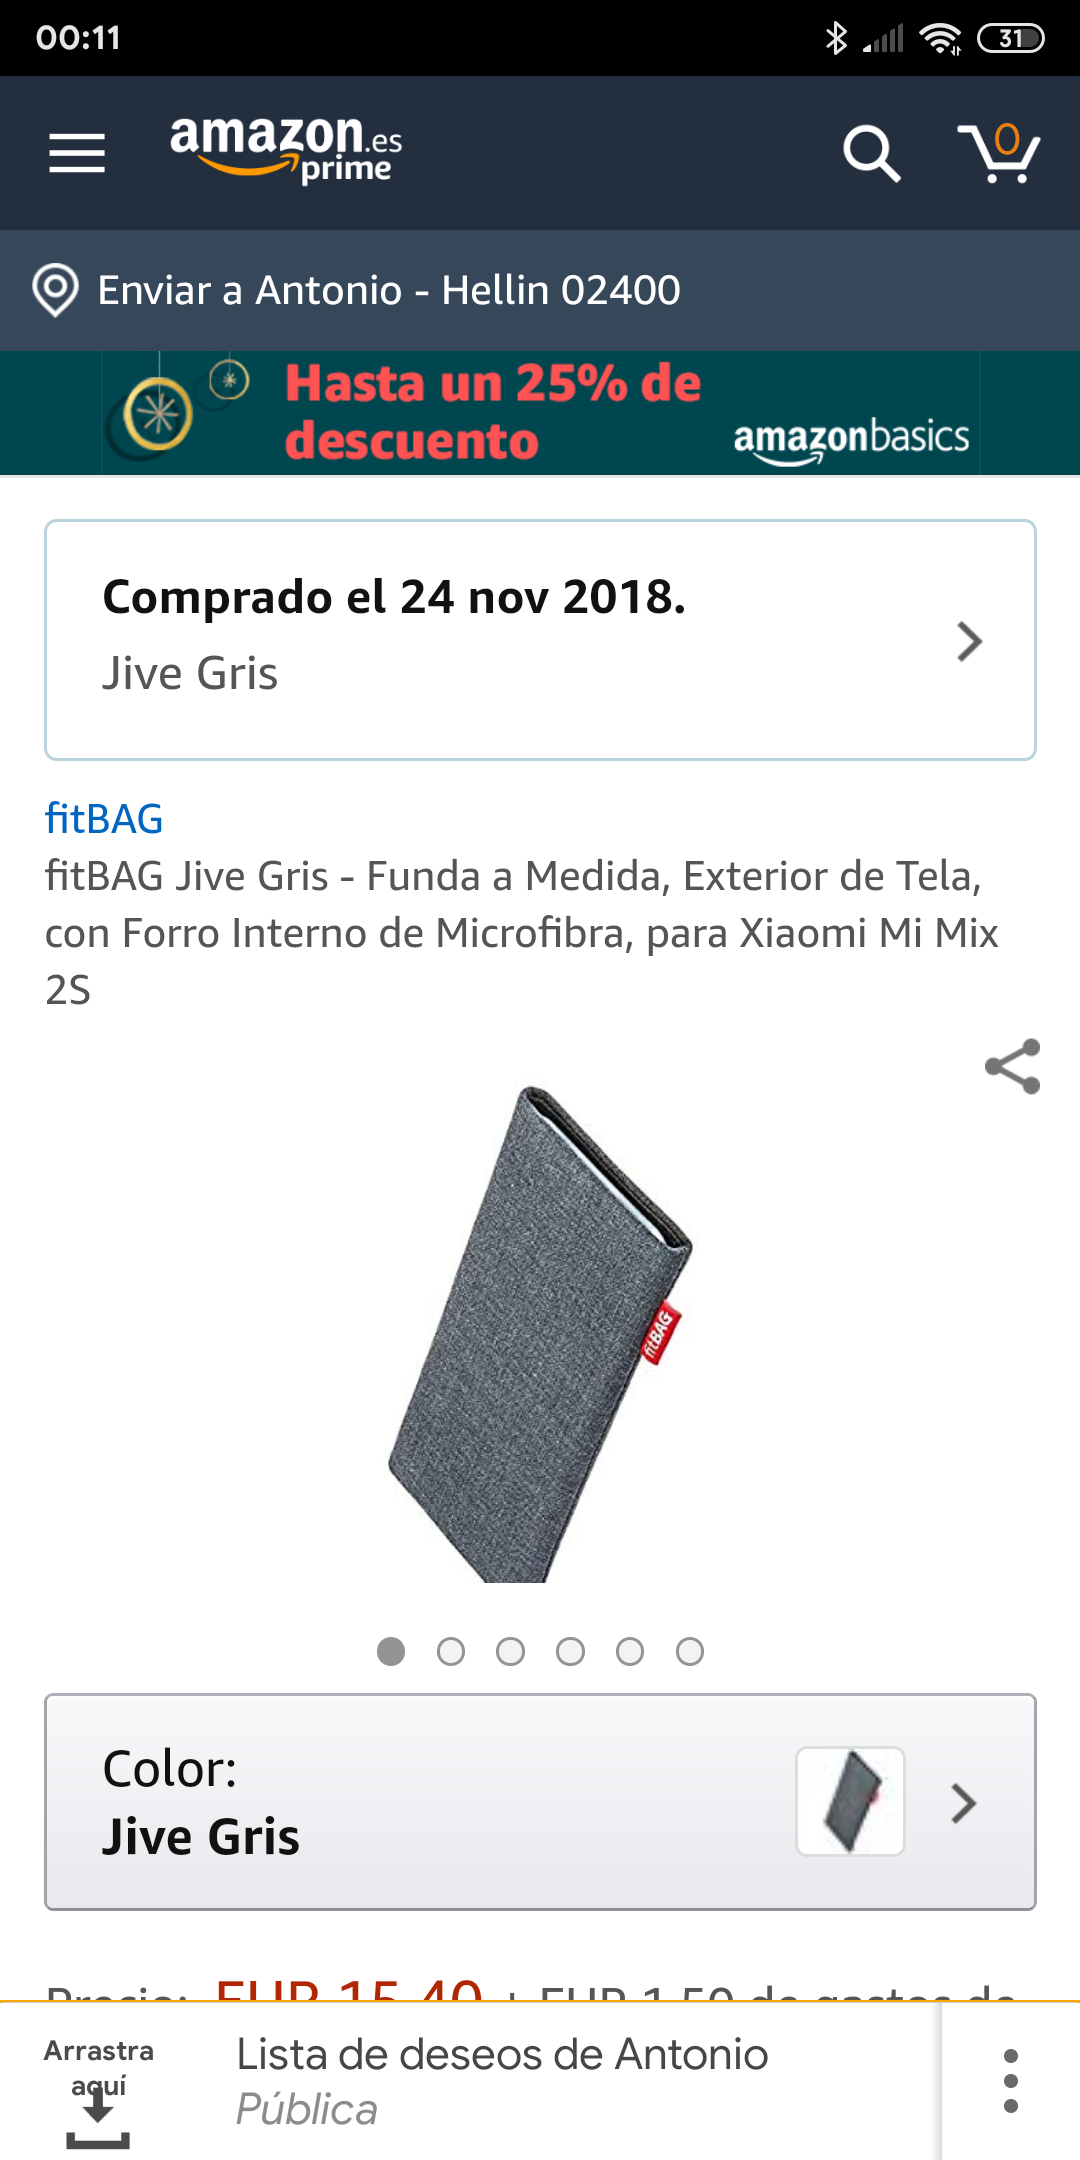 Screenshot_2018-12-22-00-11-29-496_com.amazon.mShop.android.shopping.png